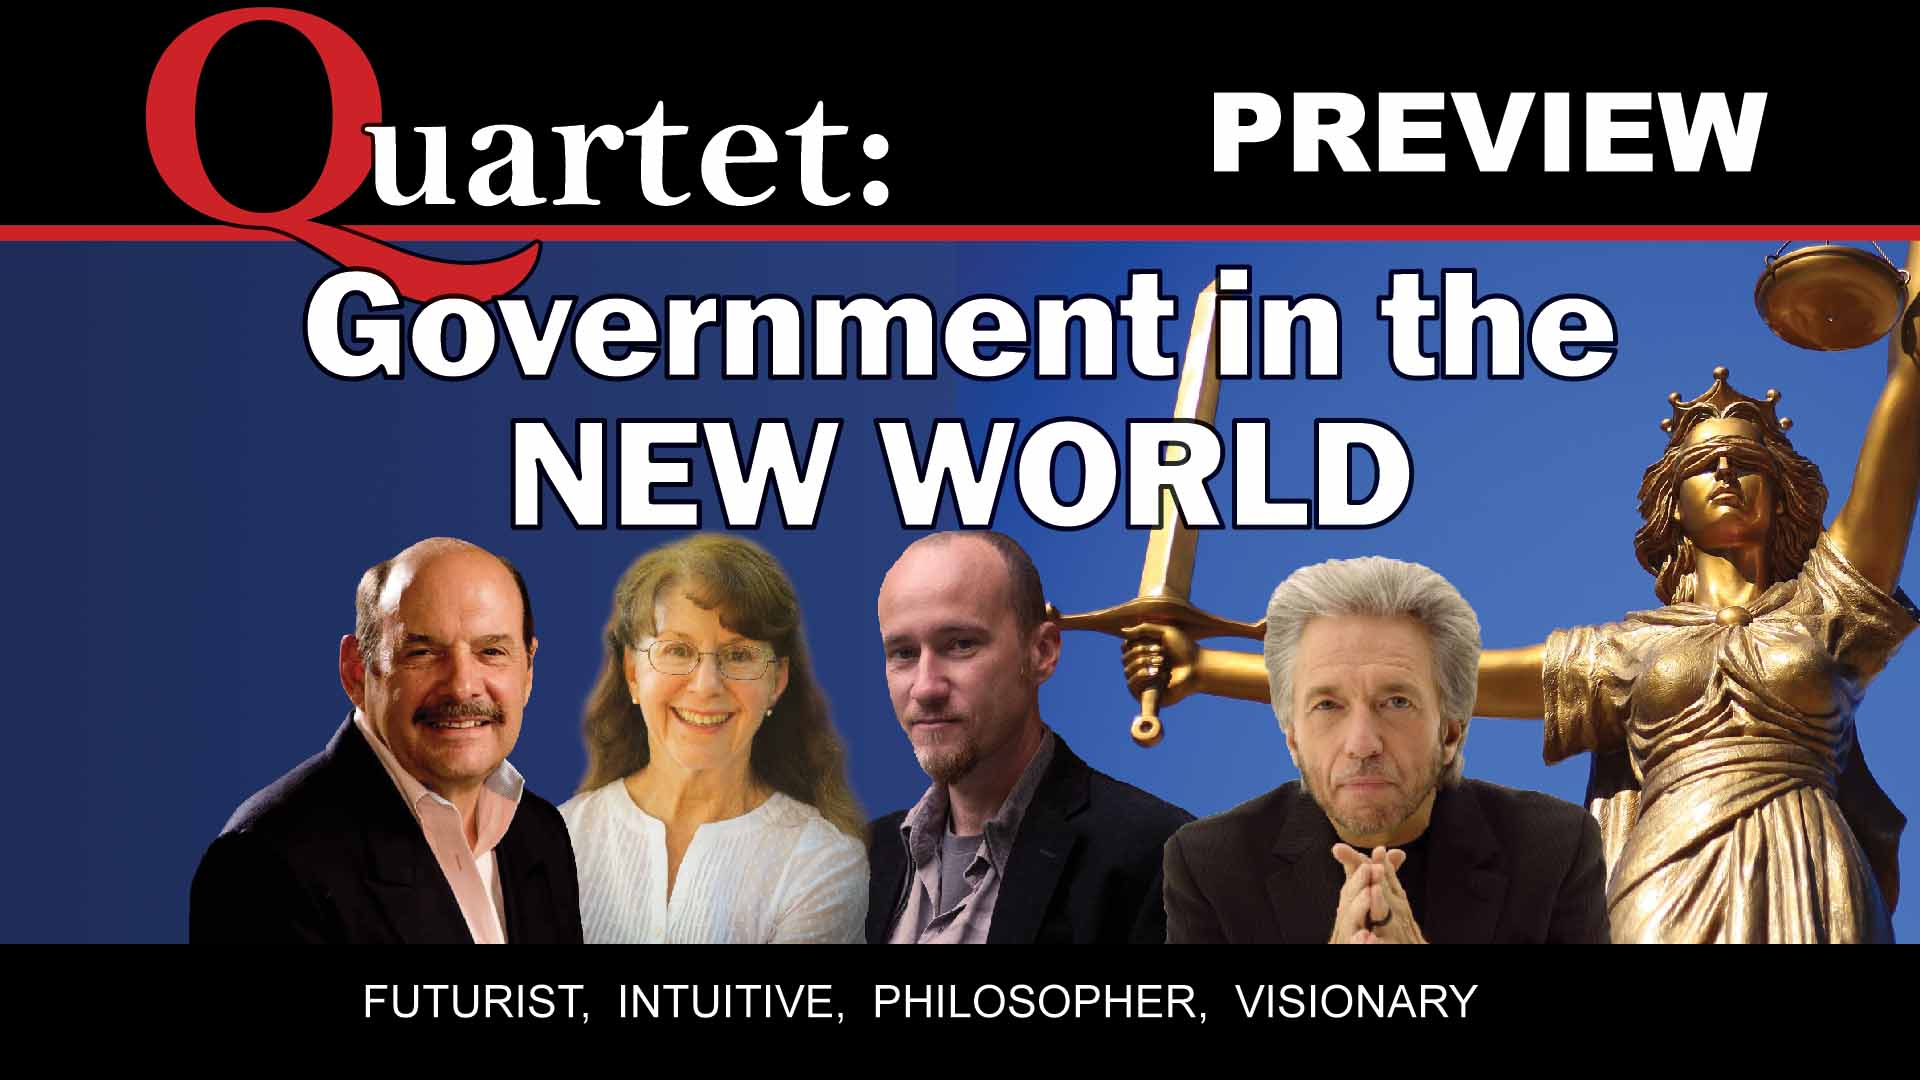 Quartet Preview, Government in the New World